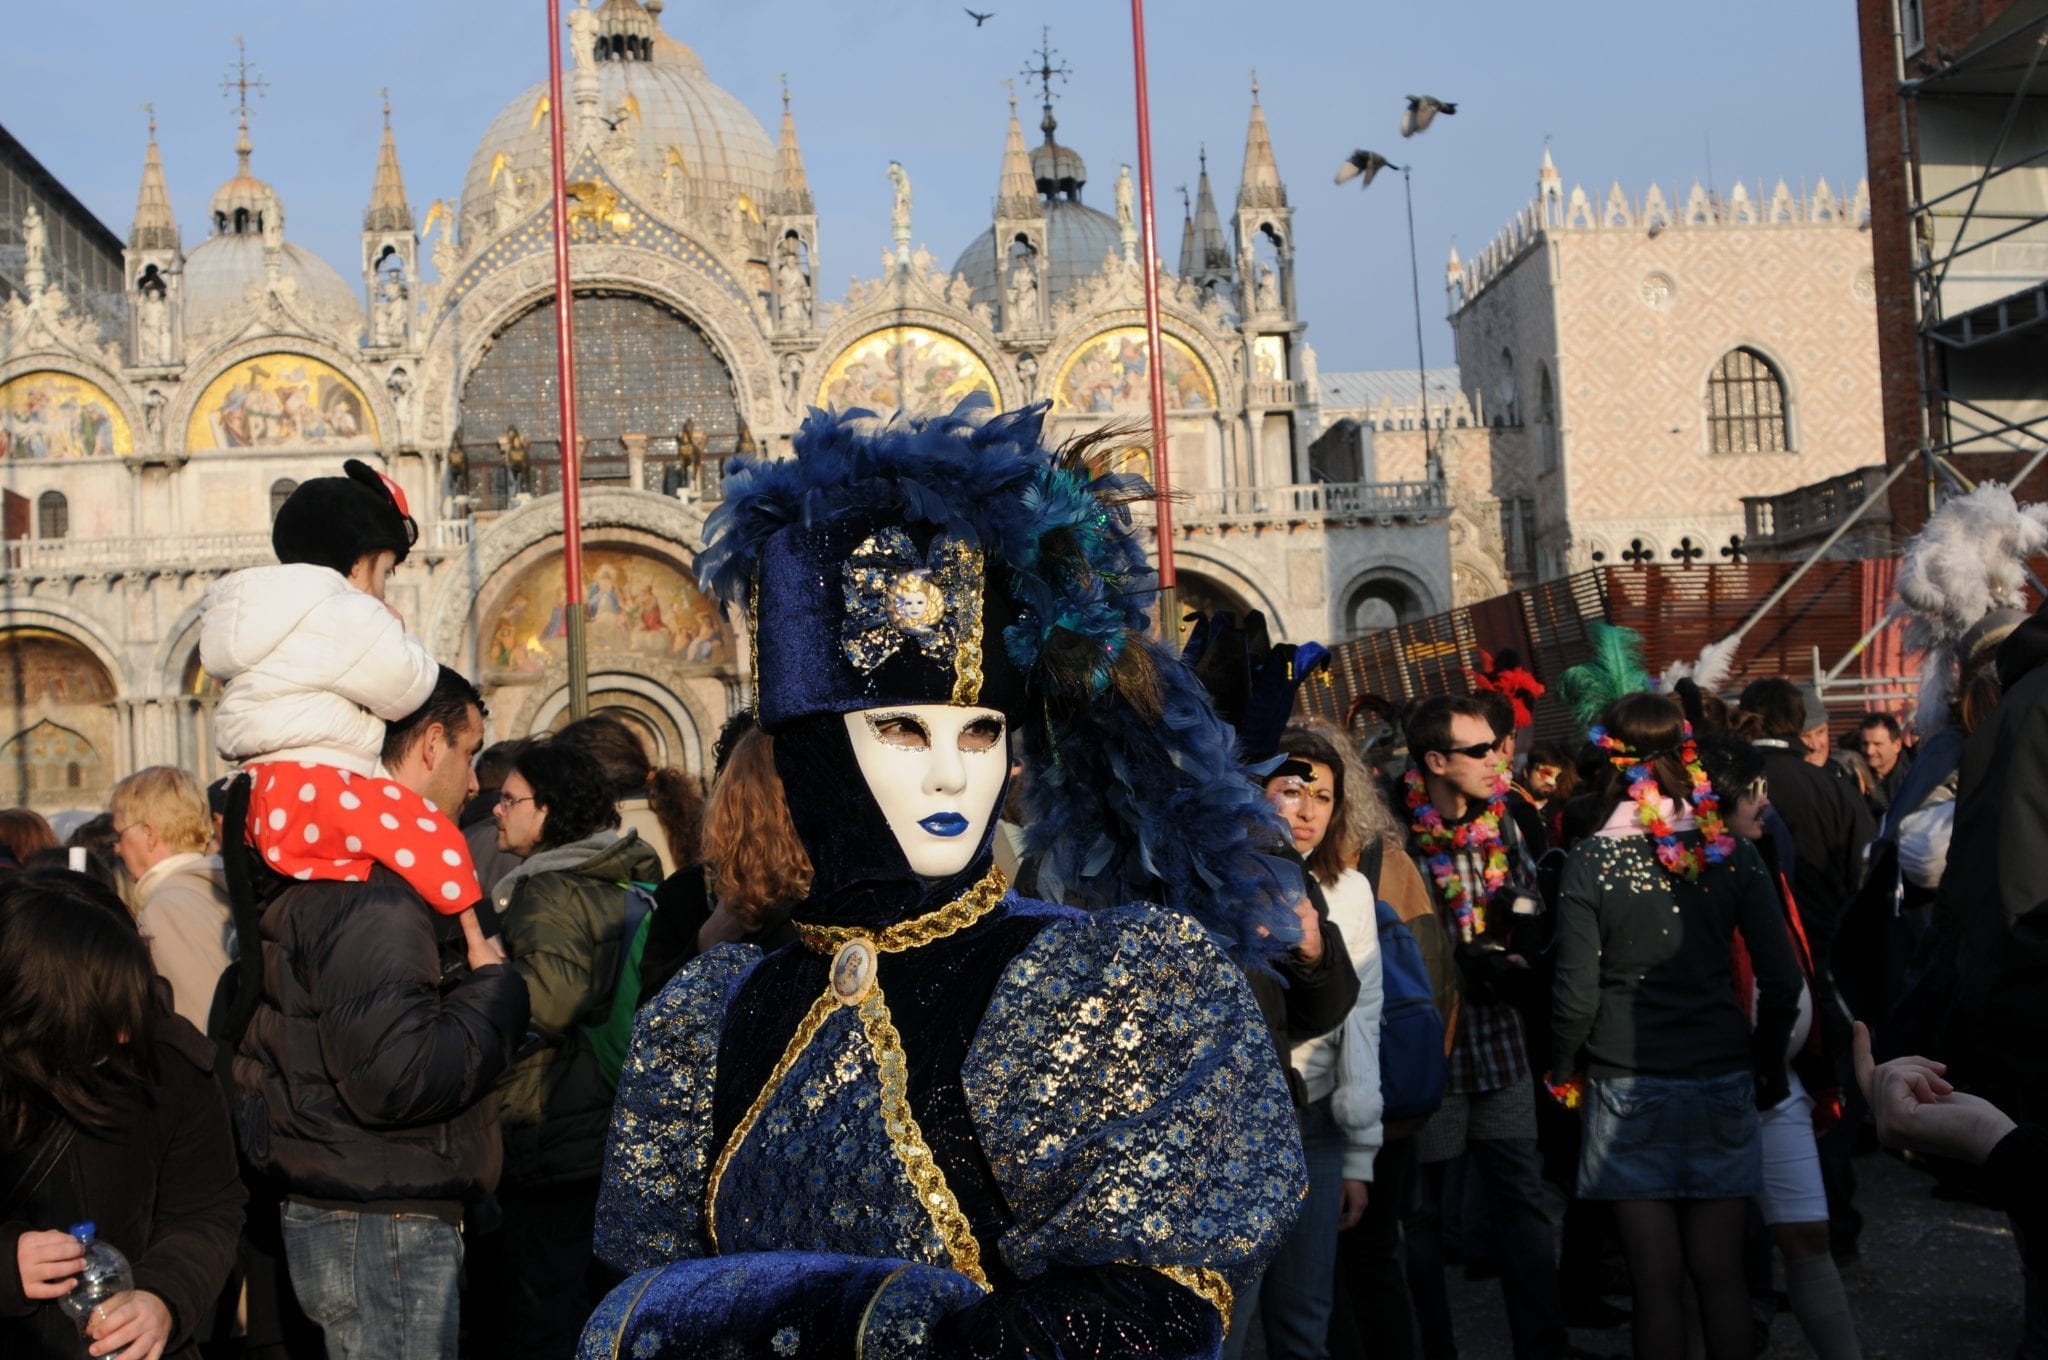 Carnevale All About Carnival in Venice Masks & More